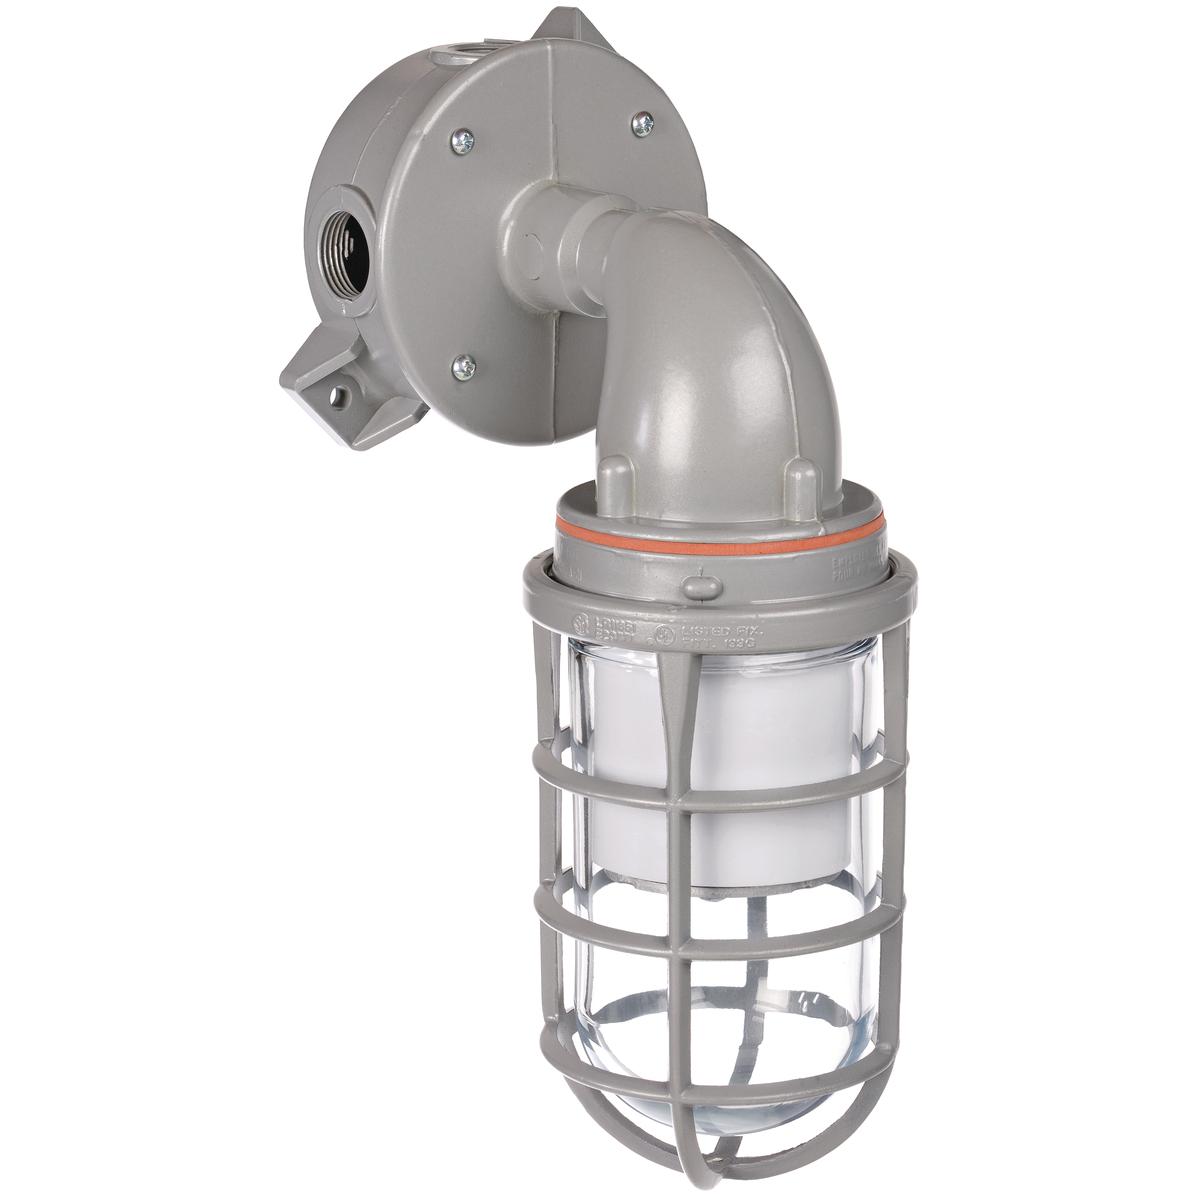 Hubbell VSL1330W2HG-CP The VSL Series is a Vapor Tight/ Utility fixture using energy efficient LED's. This fixture is made with a cast copper-free aluminum housing and mount that is  suitable for harsh and hazardous environments. With the design of this fixtures internal heat s